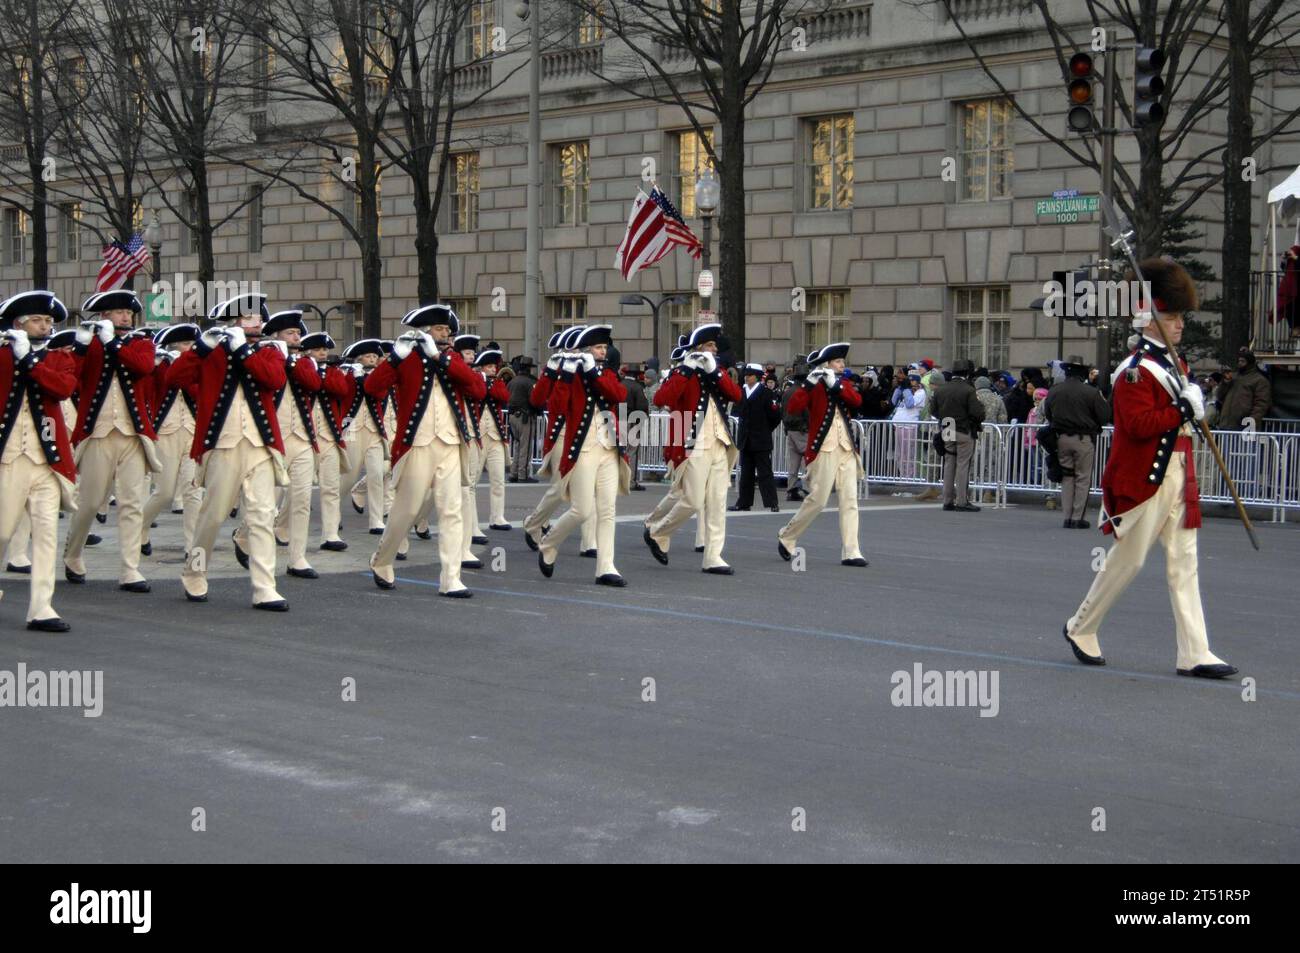 0901209954T-132 WASHINGTON (Jan. 20, 2009) The Army Old Guard Fife and Drum Corps march down Pennsylvania Avenue during the 2009 presidential inaugural parade in Washington, D.C., Jan. 20, 2009. More than 5,000 men and women in uniform are providing military ceremonial support to the 2009 Presidential Inauguration, a tradition dating back to George Washington's 1789 Inauguration. Navy Stock Photo